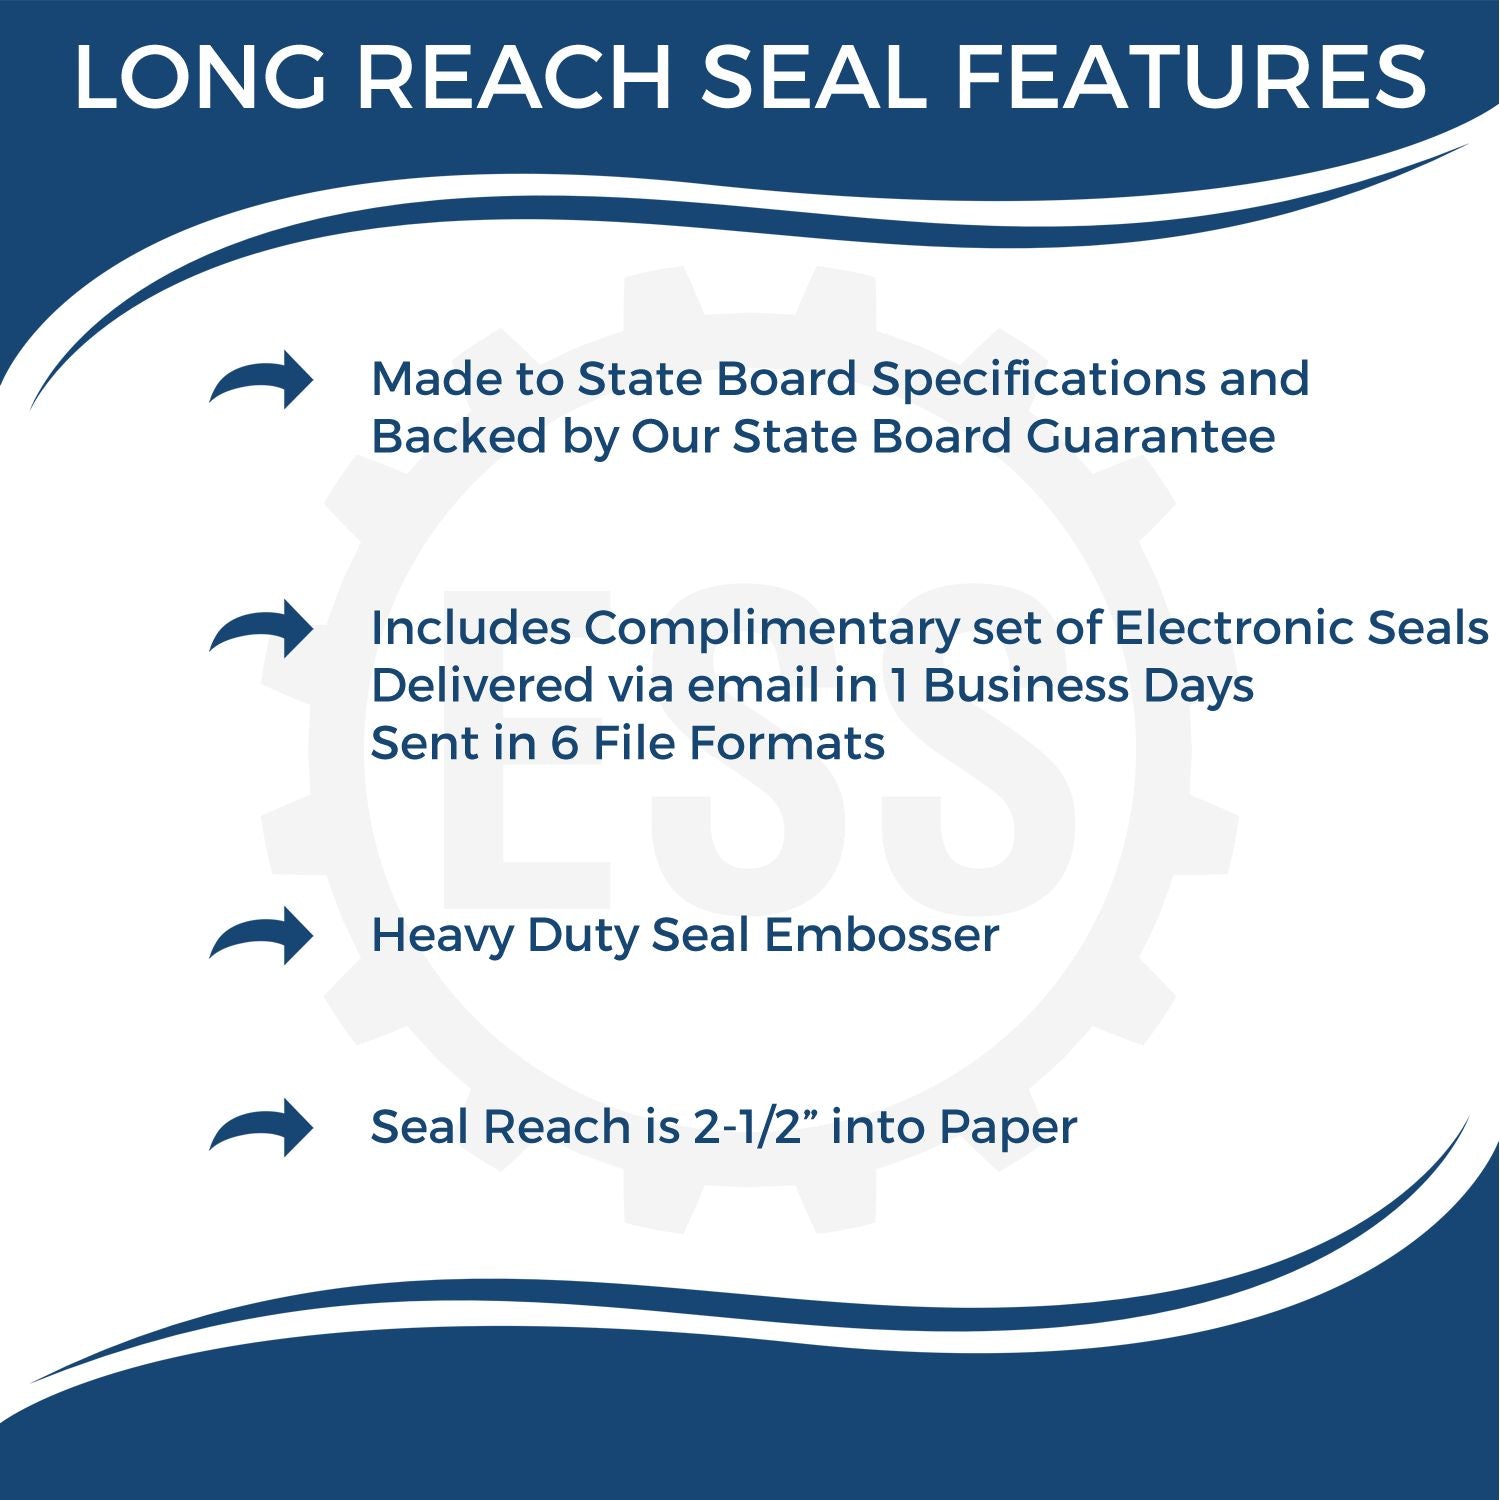 The main image for the Long Reach Connecticut PE Seal depicting a sample of the imprint and electronic files